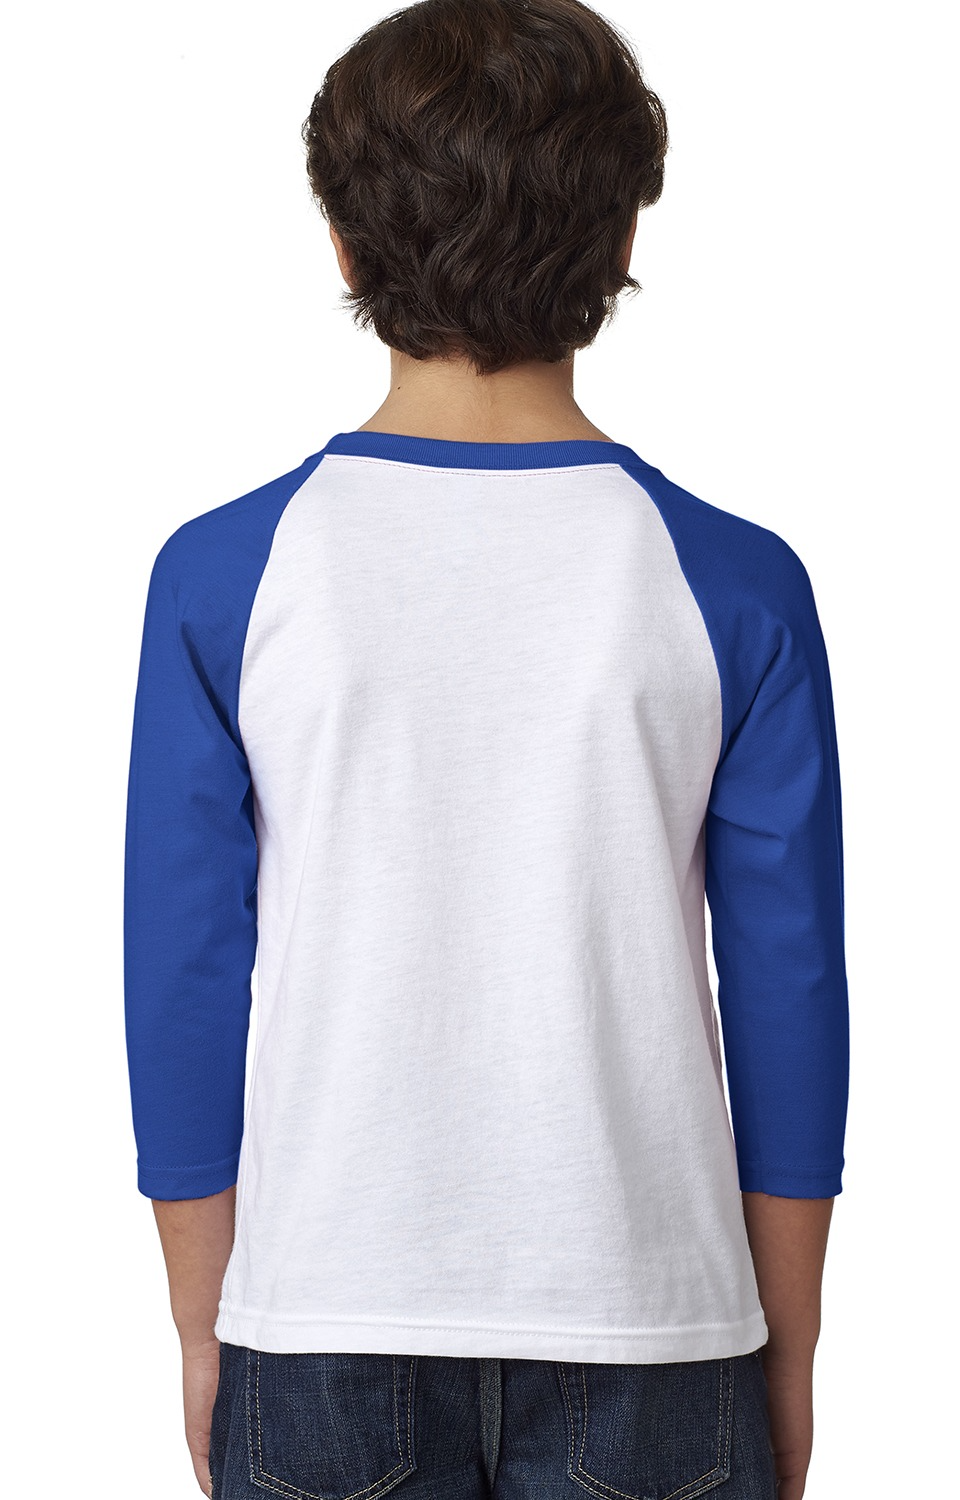 Details about   Champro Youth 3/4 Sleeve Shirt Royal/White 